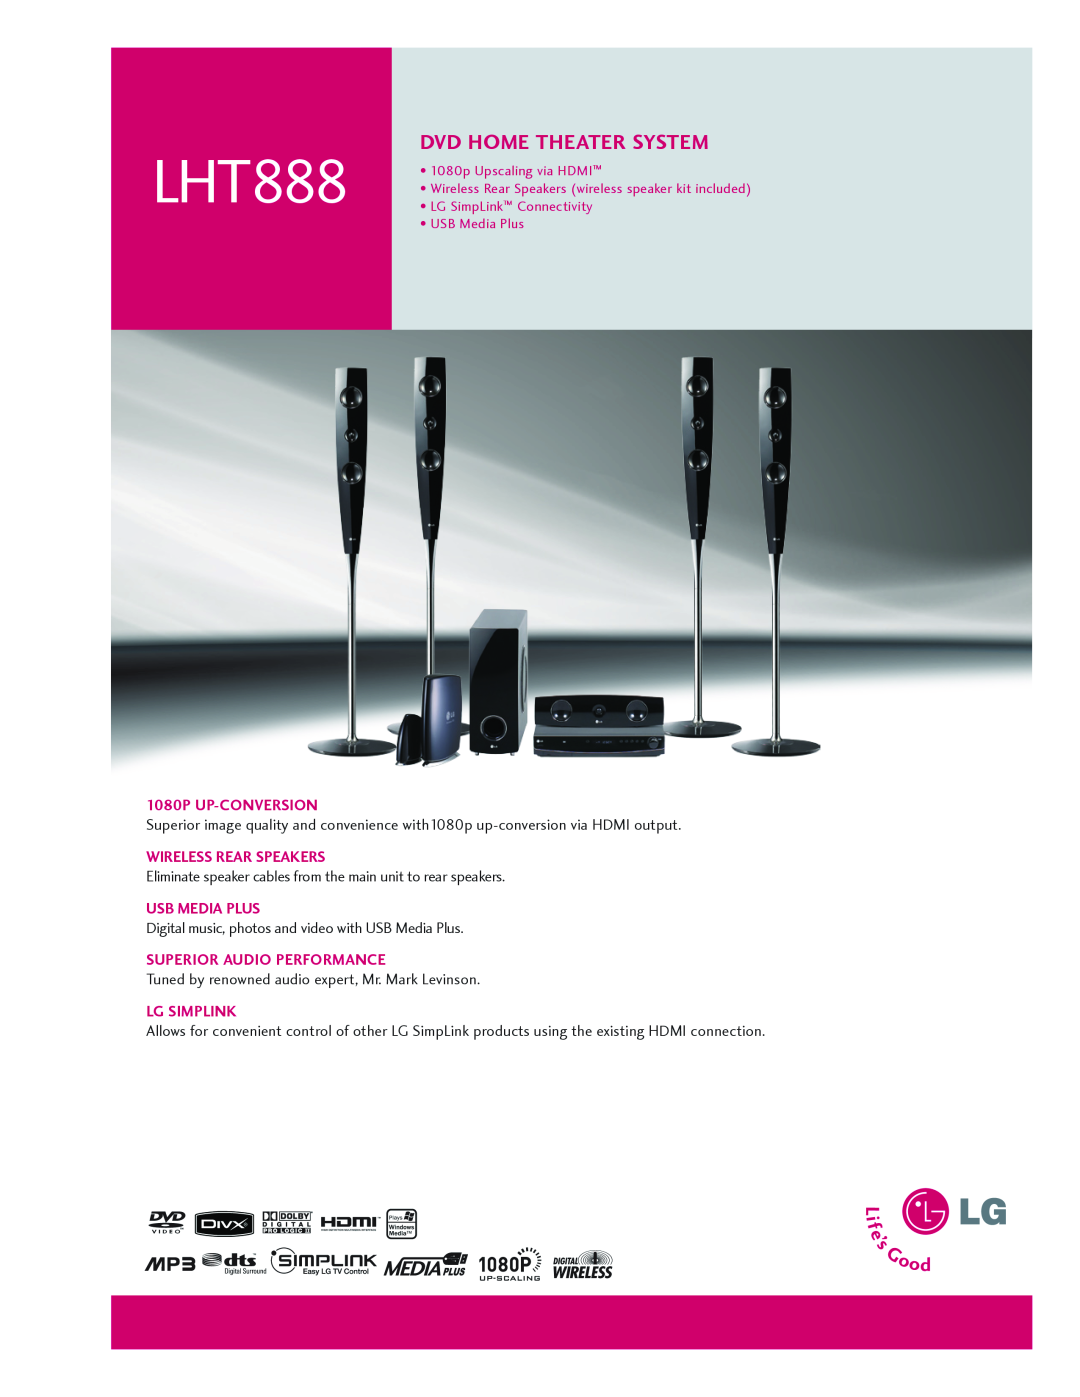 LG Electronics LHT888 manual dvd Home theater system, 1080p UP-CONVERSION, Wireless Rear Speakers, Usb Media Plus 